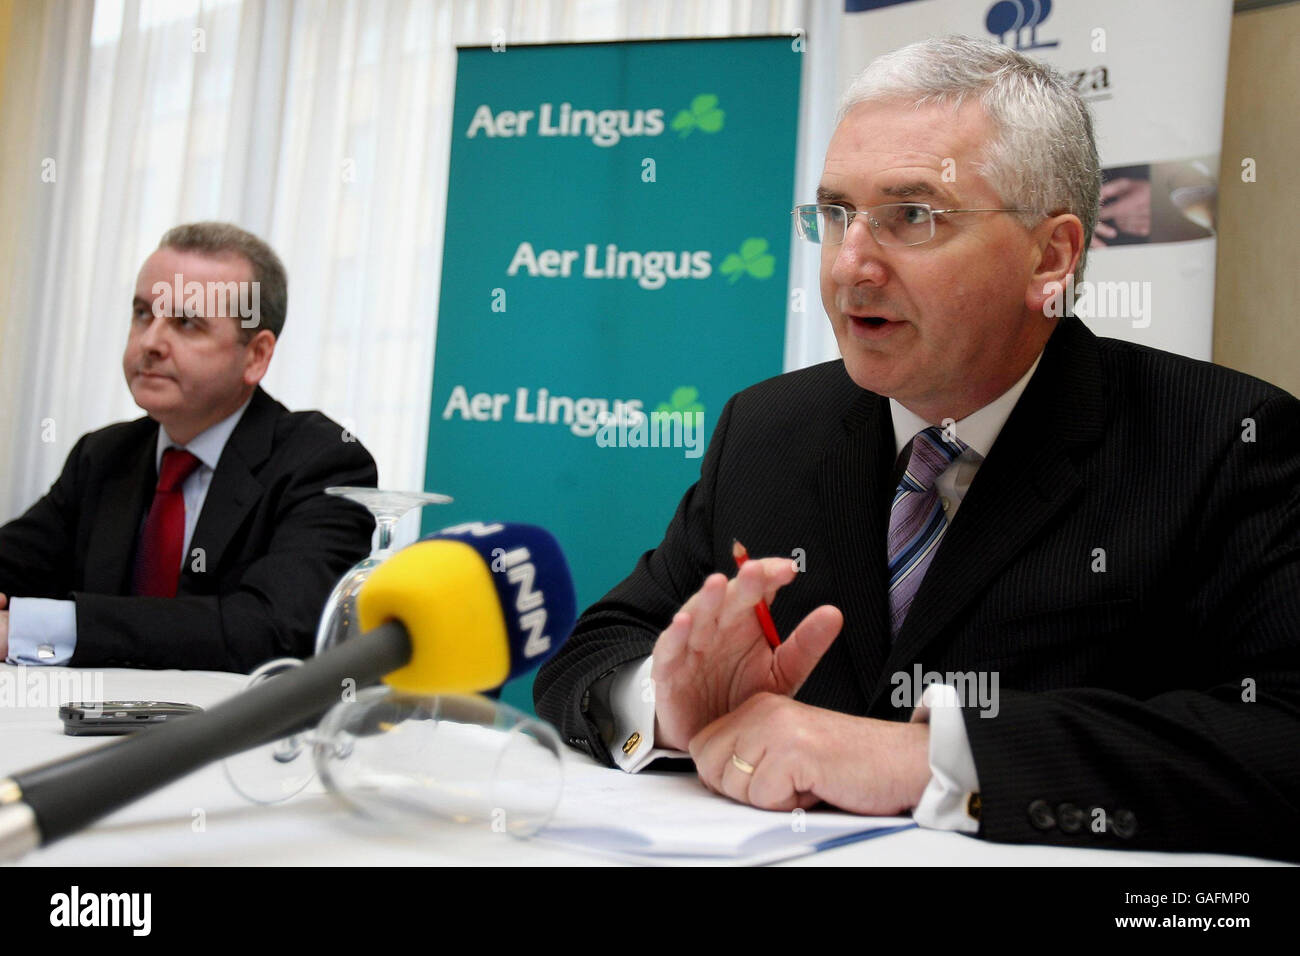 Aer Lingus launch new route Stock Photo